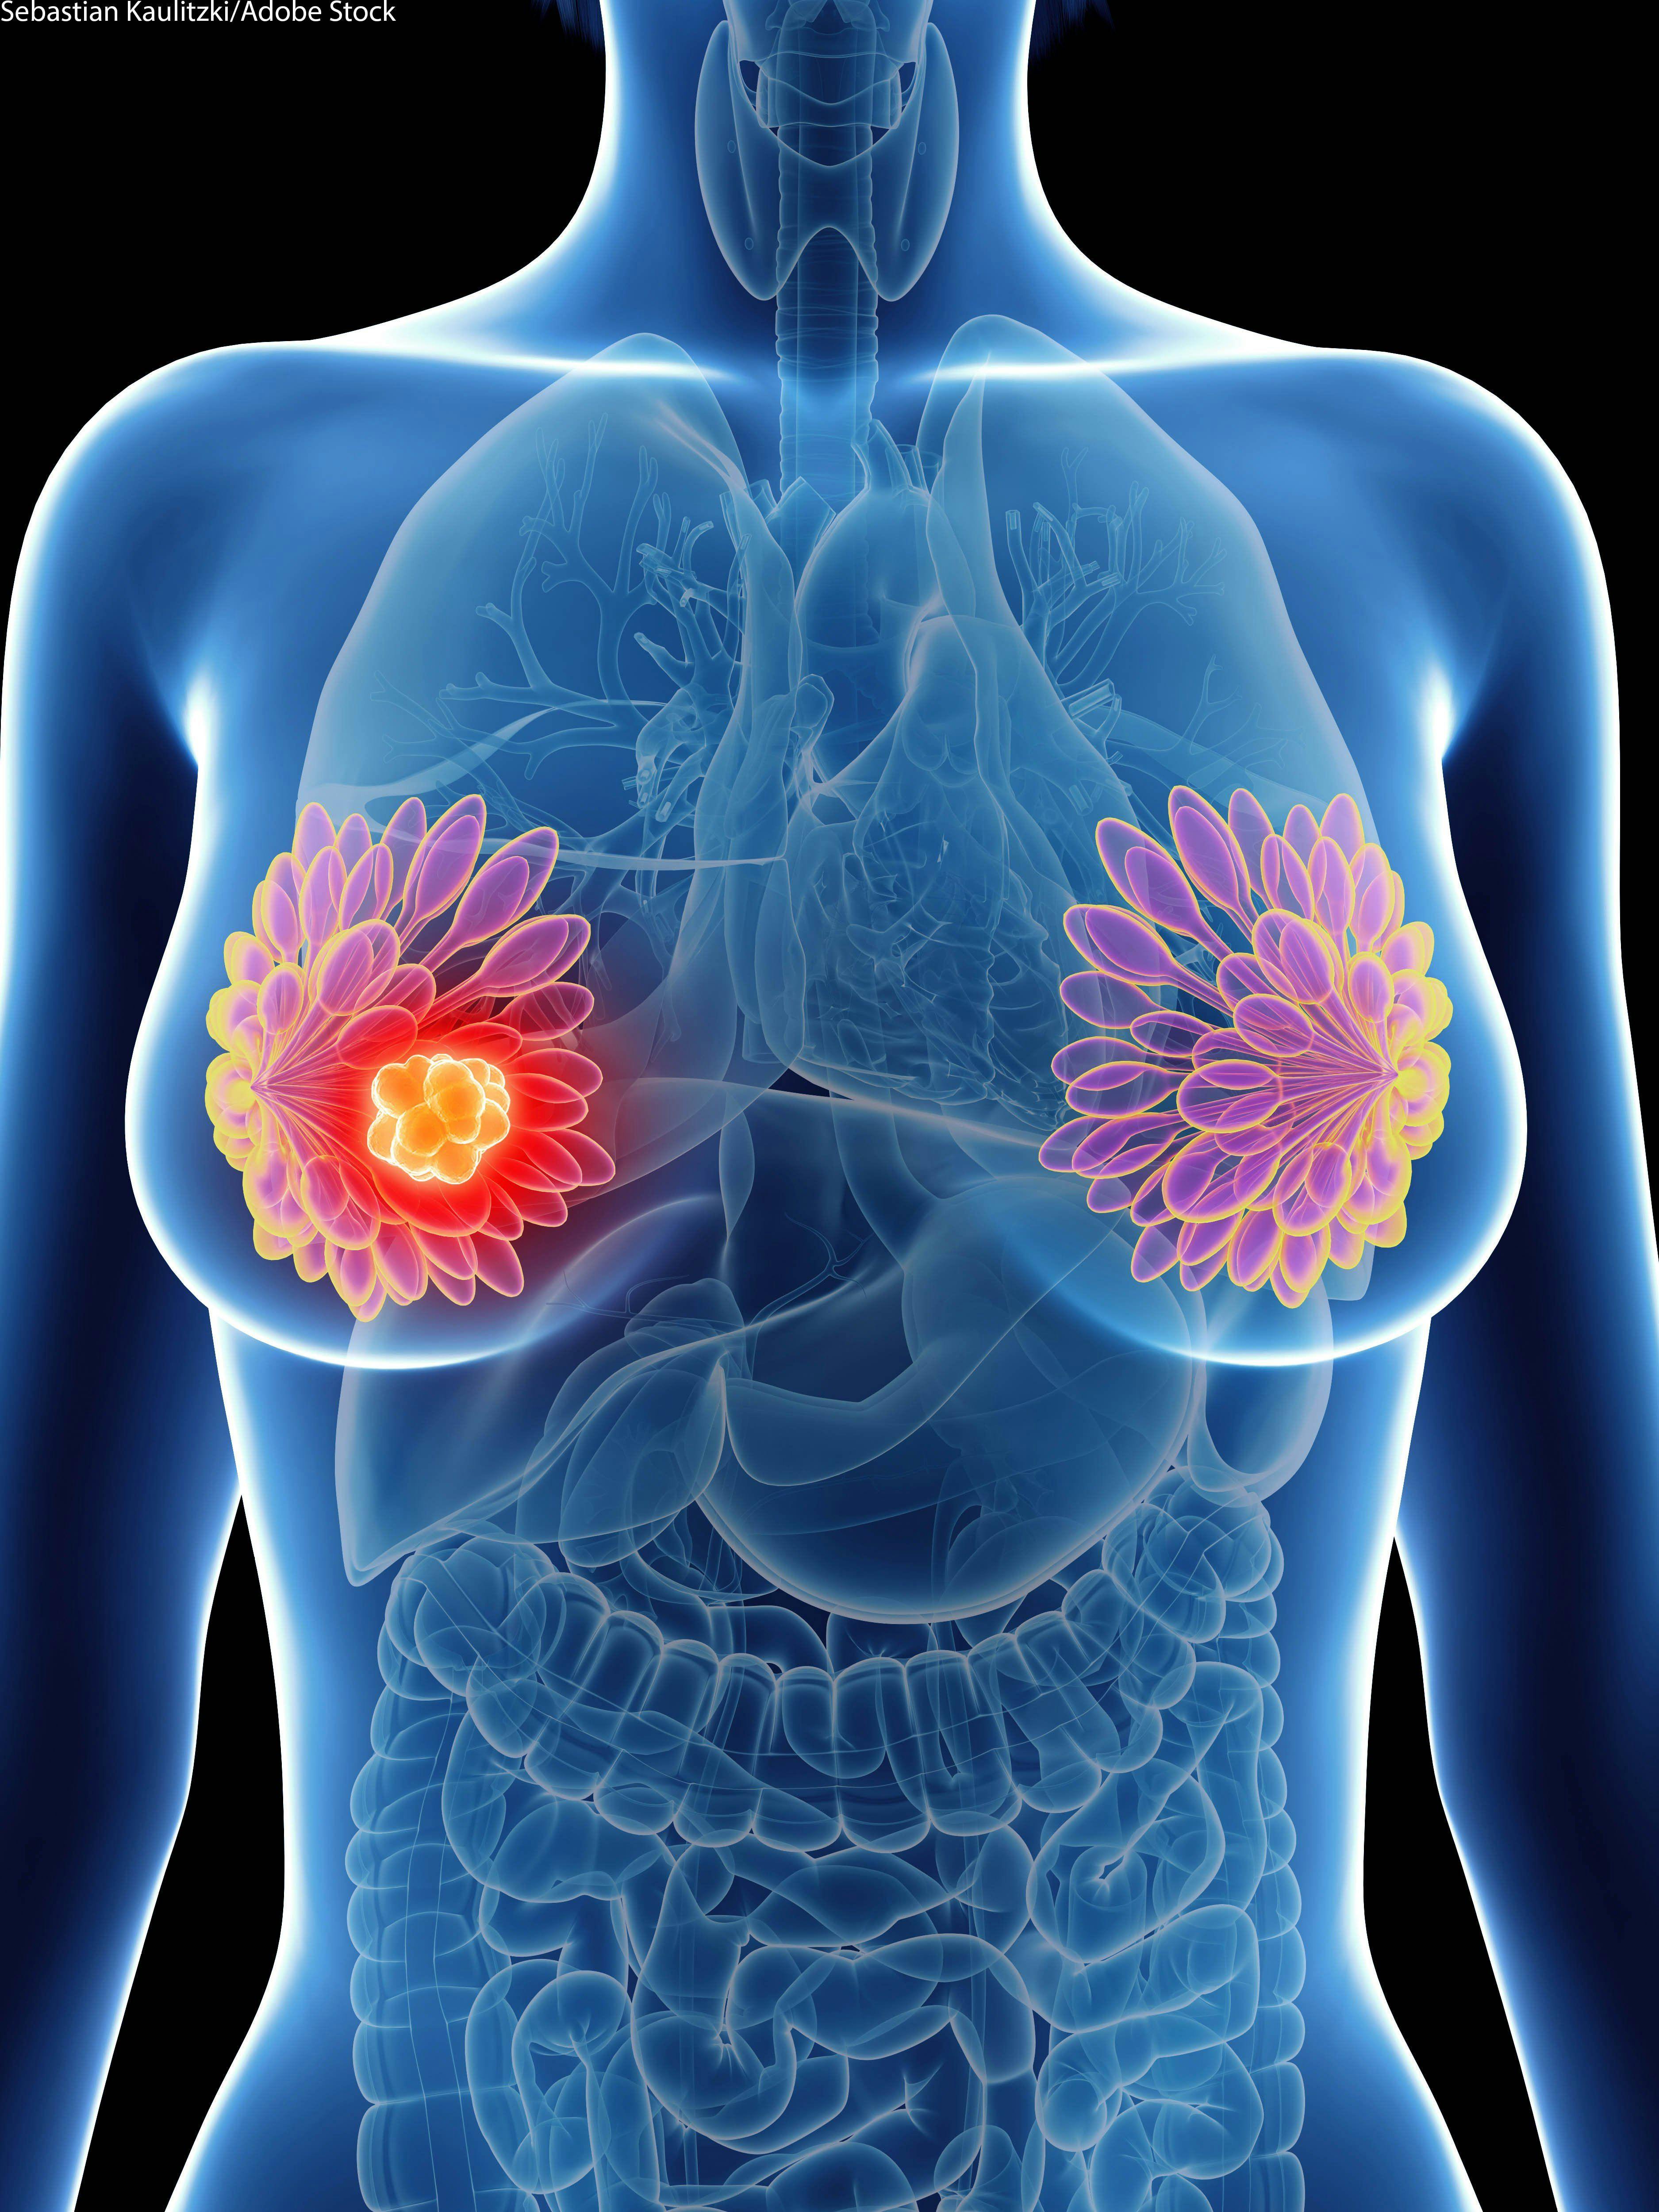 Addition of S-1 to Endocrine Therapy Postoperatively Improves Survival in HR+, HER2- Breast Cancer